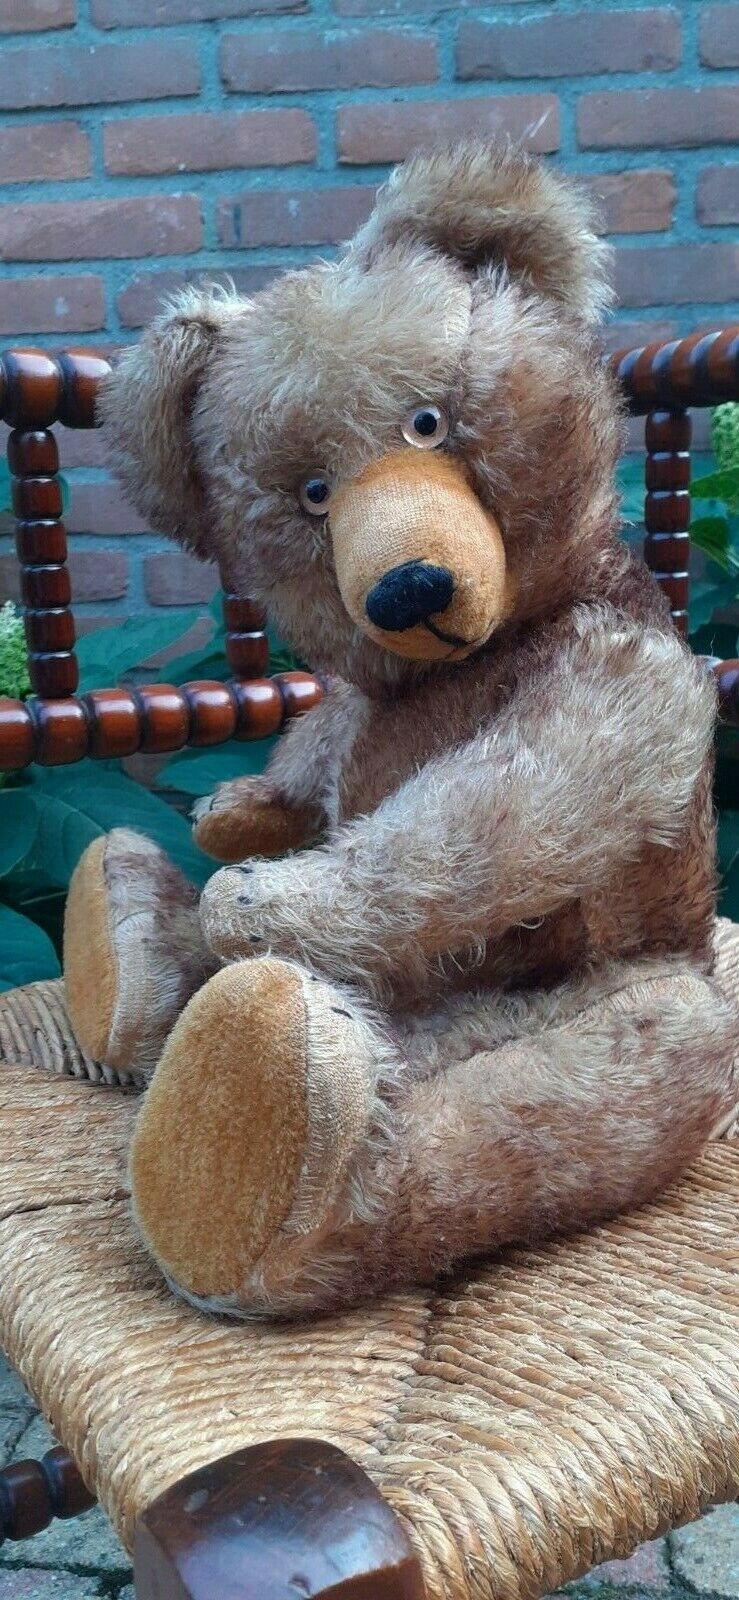 A German teddy bear 1910-1920s, with golden yellow mohair, closely